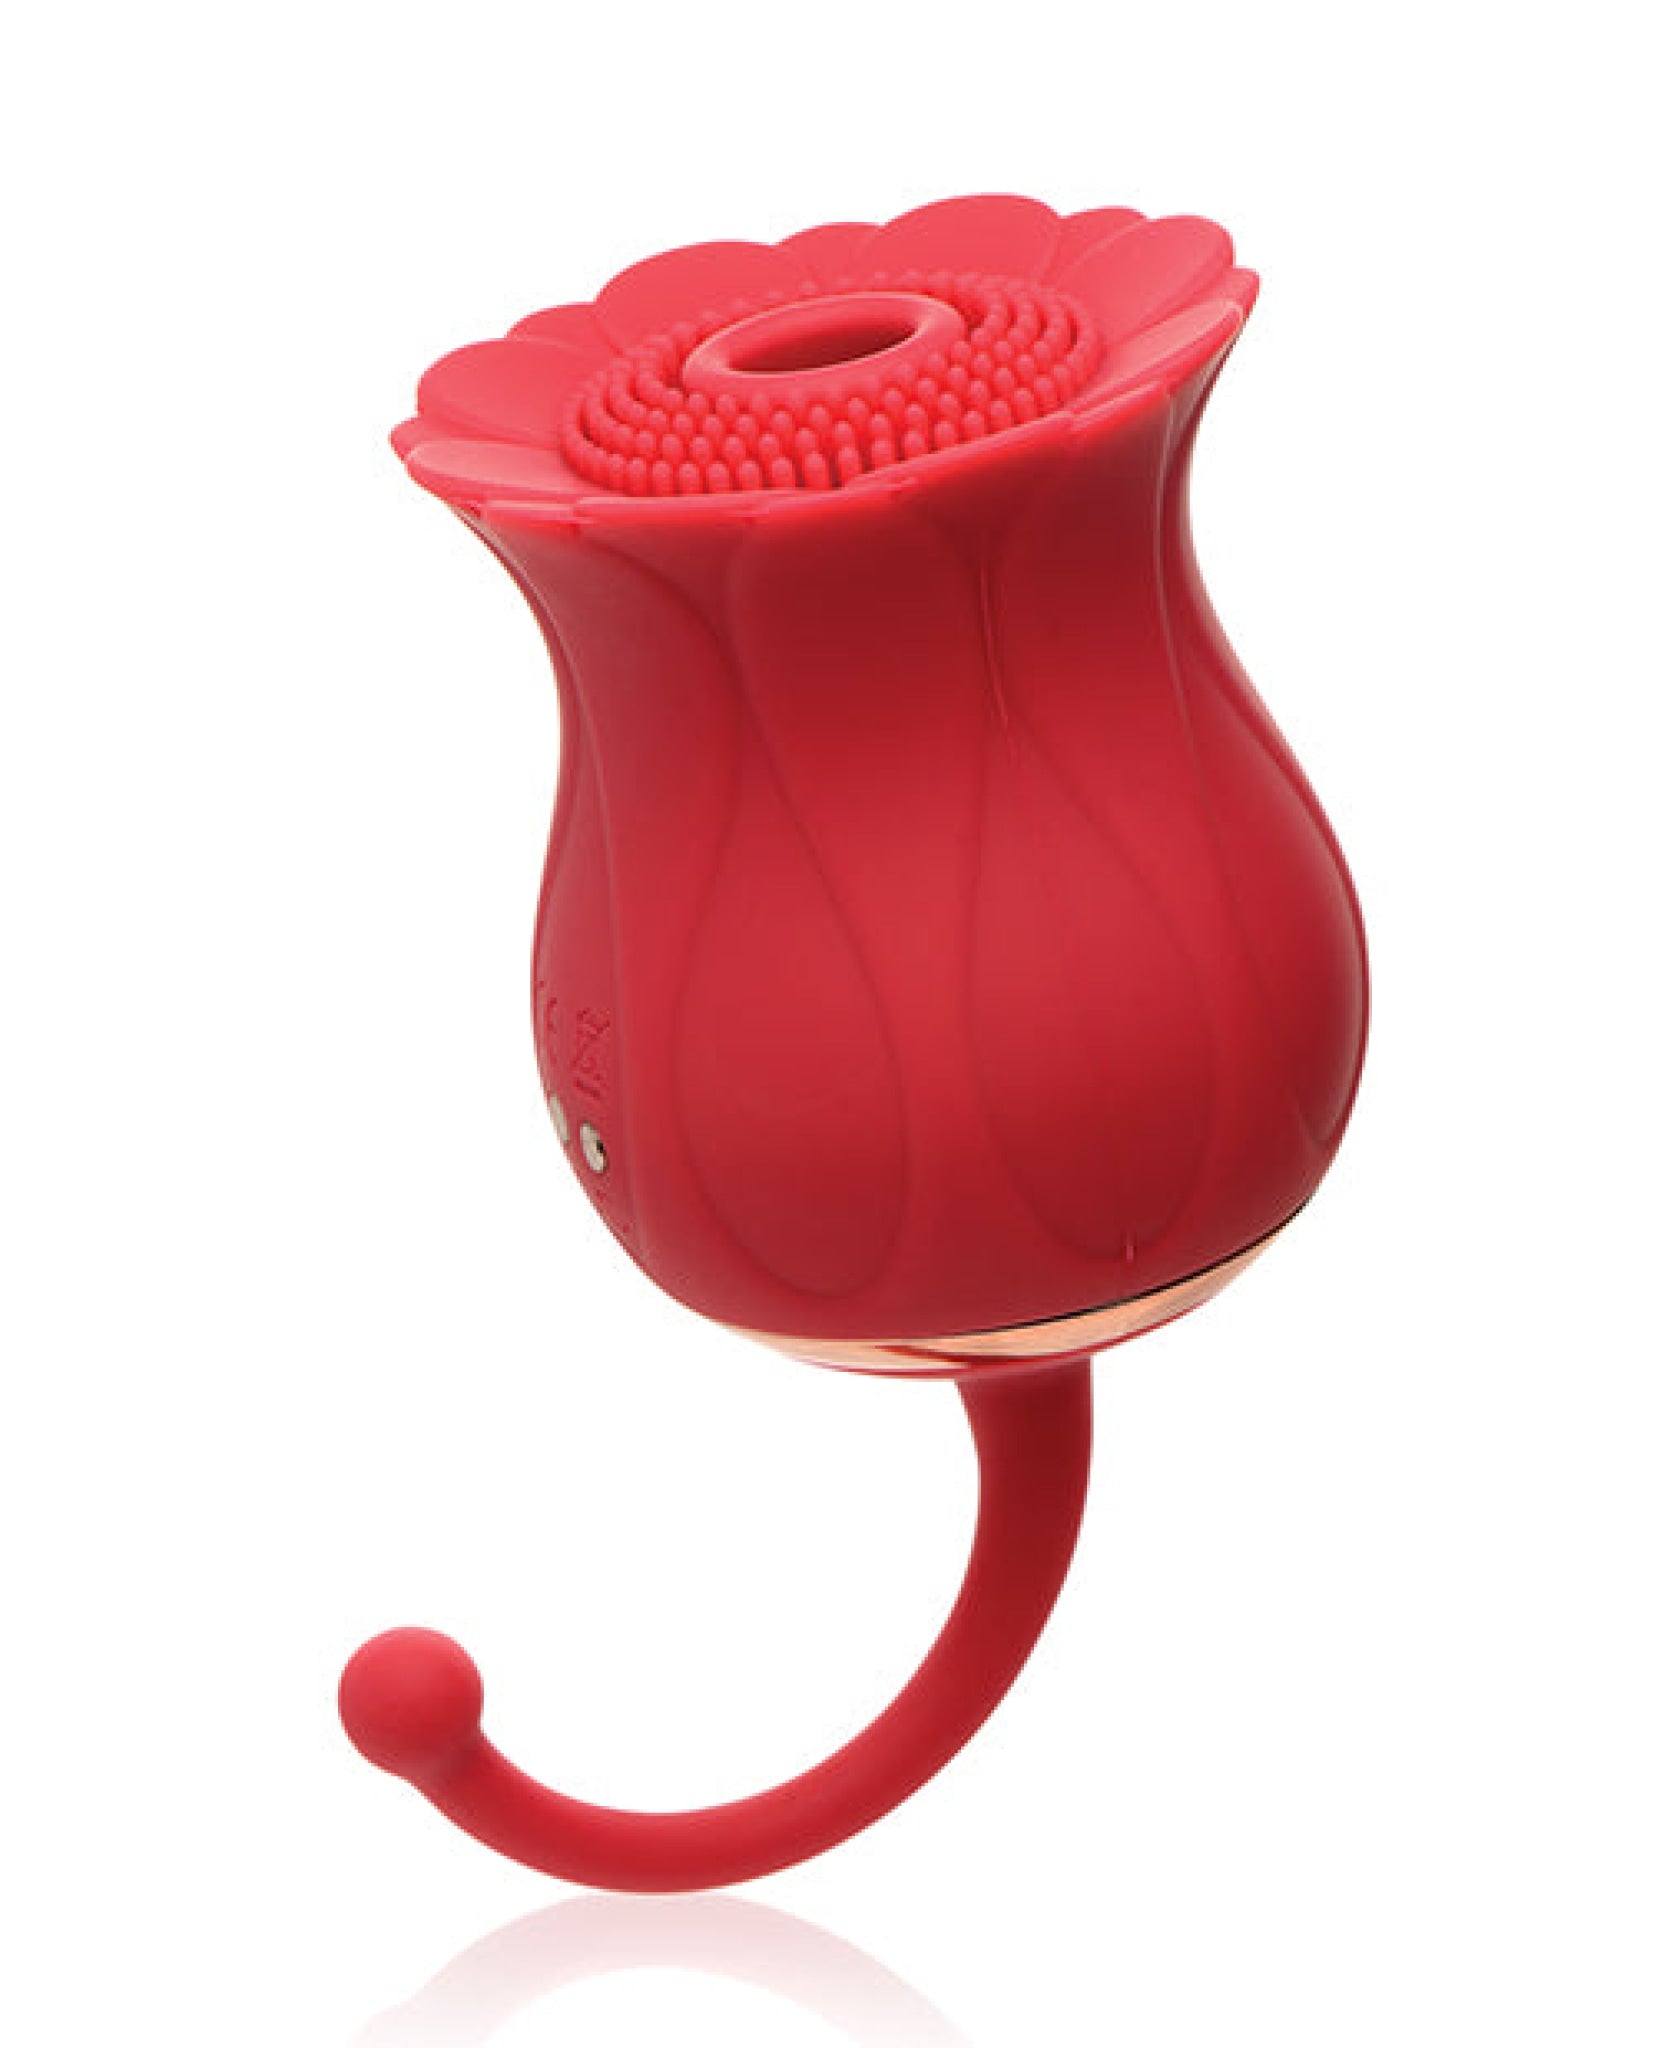 Inmi Bloomgasm Royalty Rose Textured Suction Clit Stimulator - Red Inmi